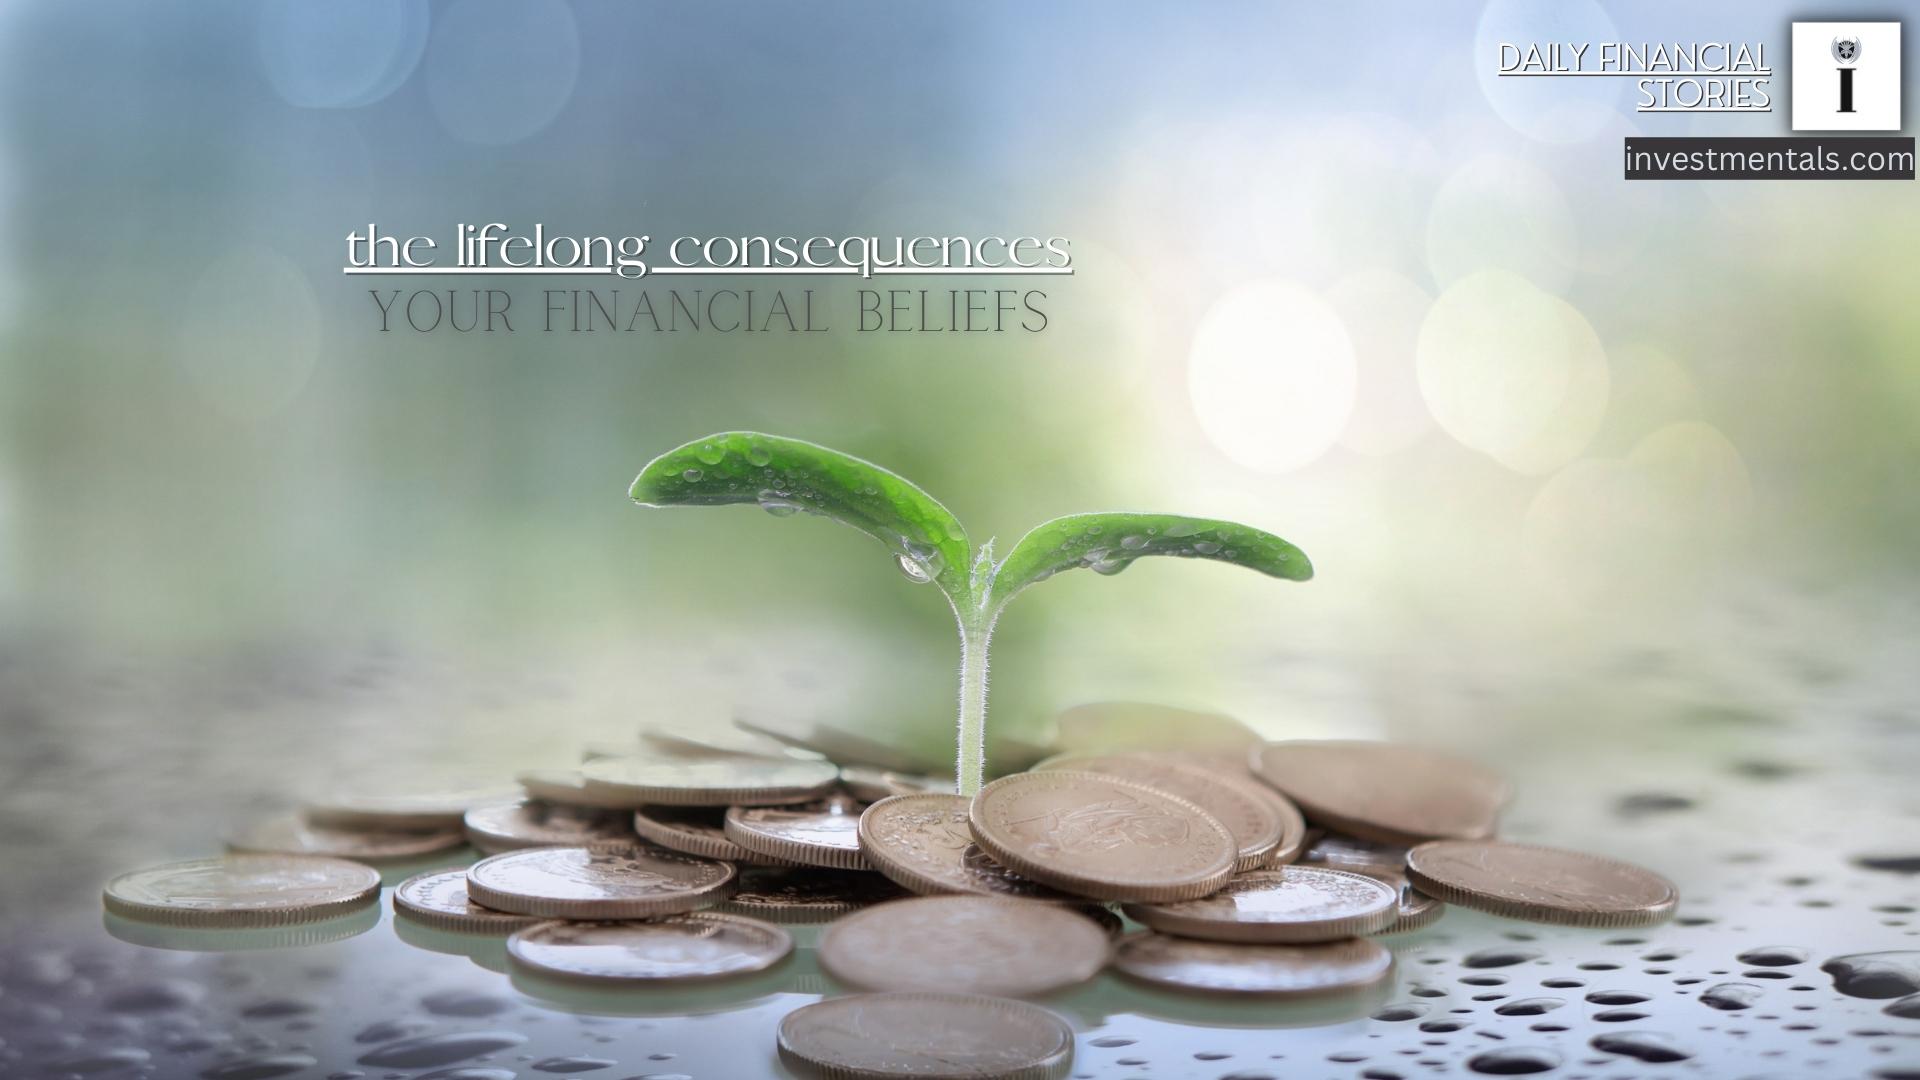 The lifelong consequences of your financial beliefs